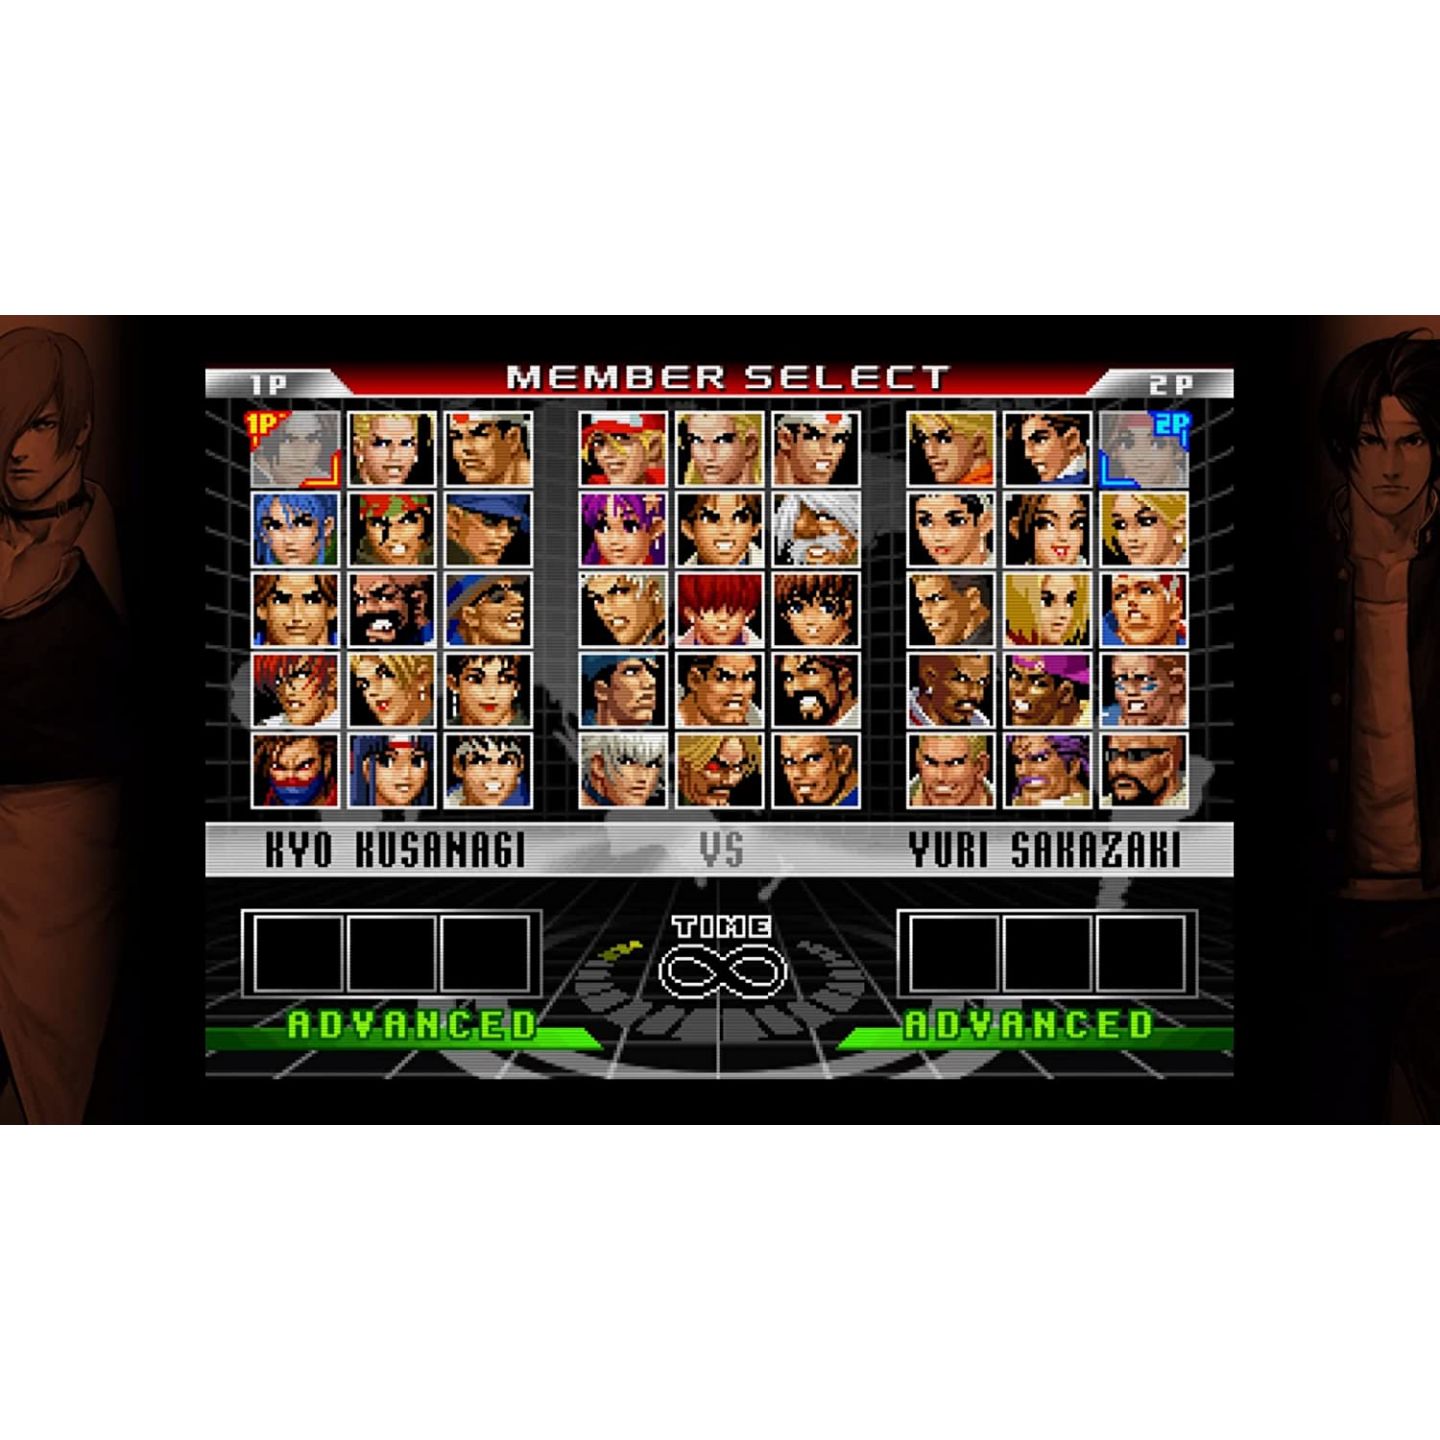 The King Of Fighters 98 Ultimate Match Final Edition